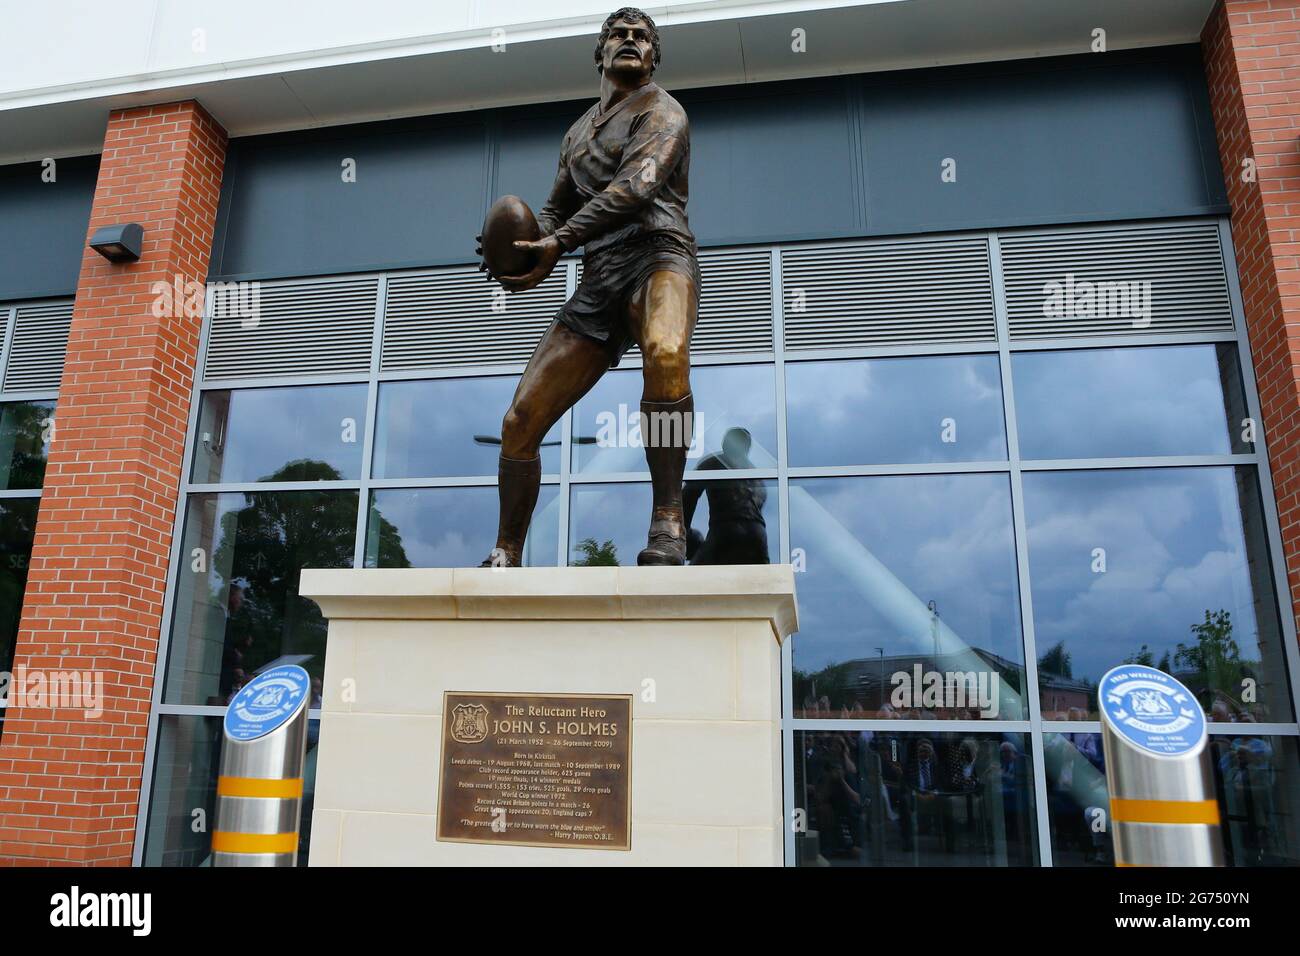 Emerald Headingley Stadium, Leeds, West Yorkshire, 11th July 2021. John Holmes Statue- Unveiling at the Emerald Headingley Stadium, Leeds. The first statue in the 130 years history of Emerald Headingley Stadium with the John Holmes Statue taking its place in front of the South Stand. John Holmes remains one of the greatest players to have ever played for Leeds Rugby League having played for over two decades for his home town club.t is only fitting that a lasting memorial is erected in JohnÕs memory at the iconic Emerald Hea Credit: Touchlinepics/Alamy Live News Stock Photo